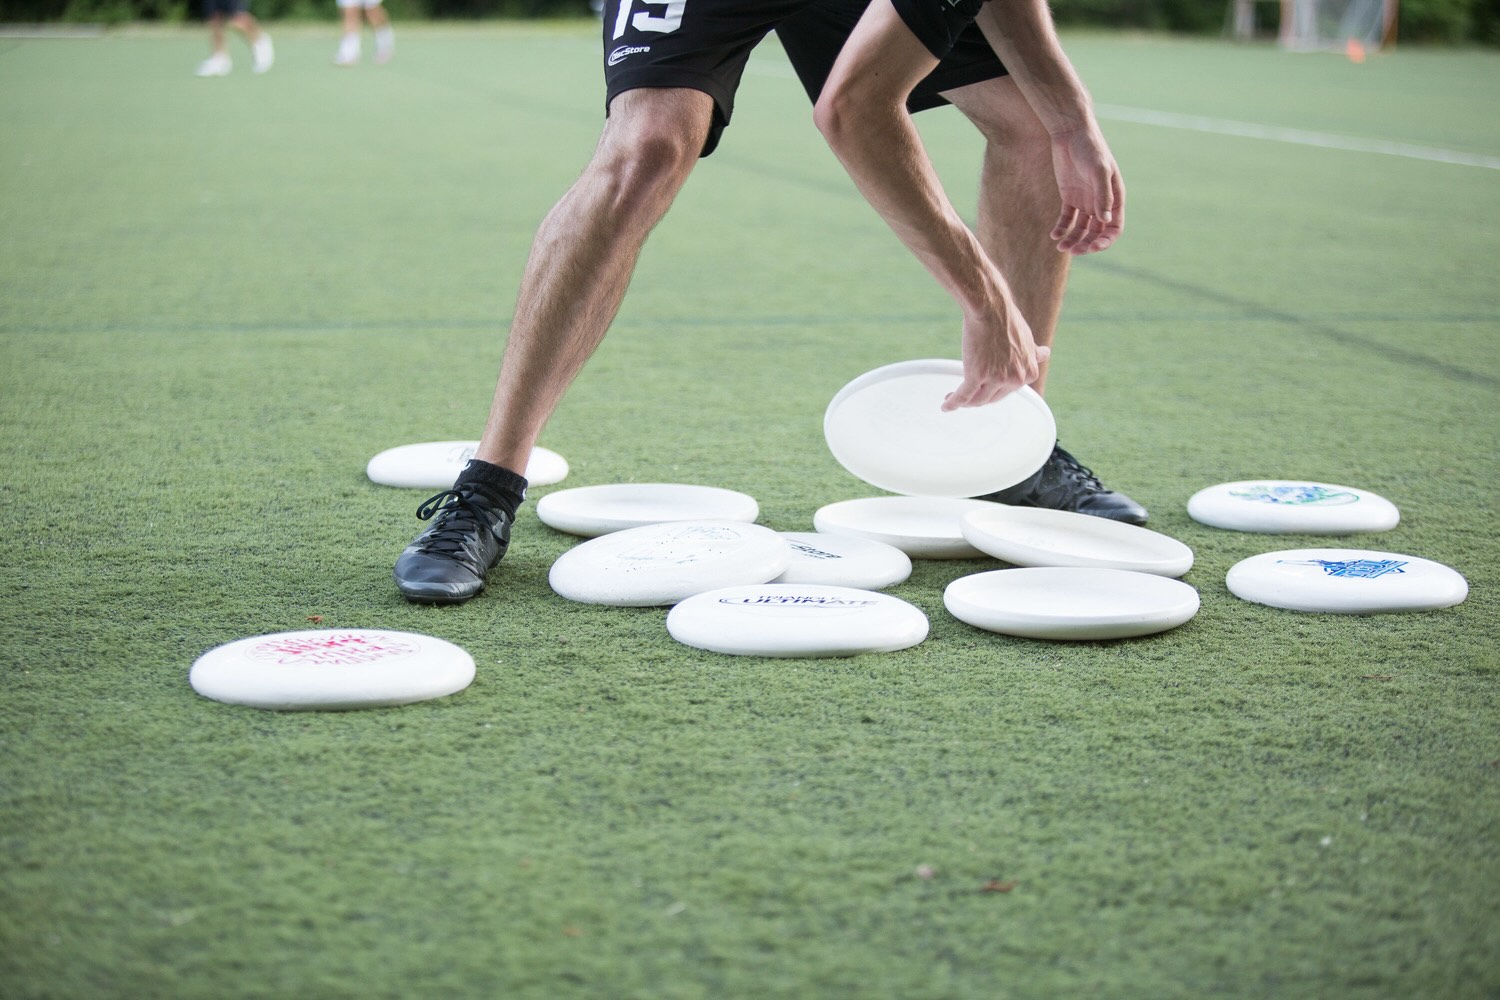 Why Is It Called Ultimate Frisbee?